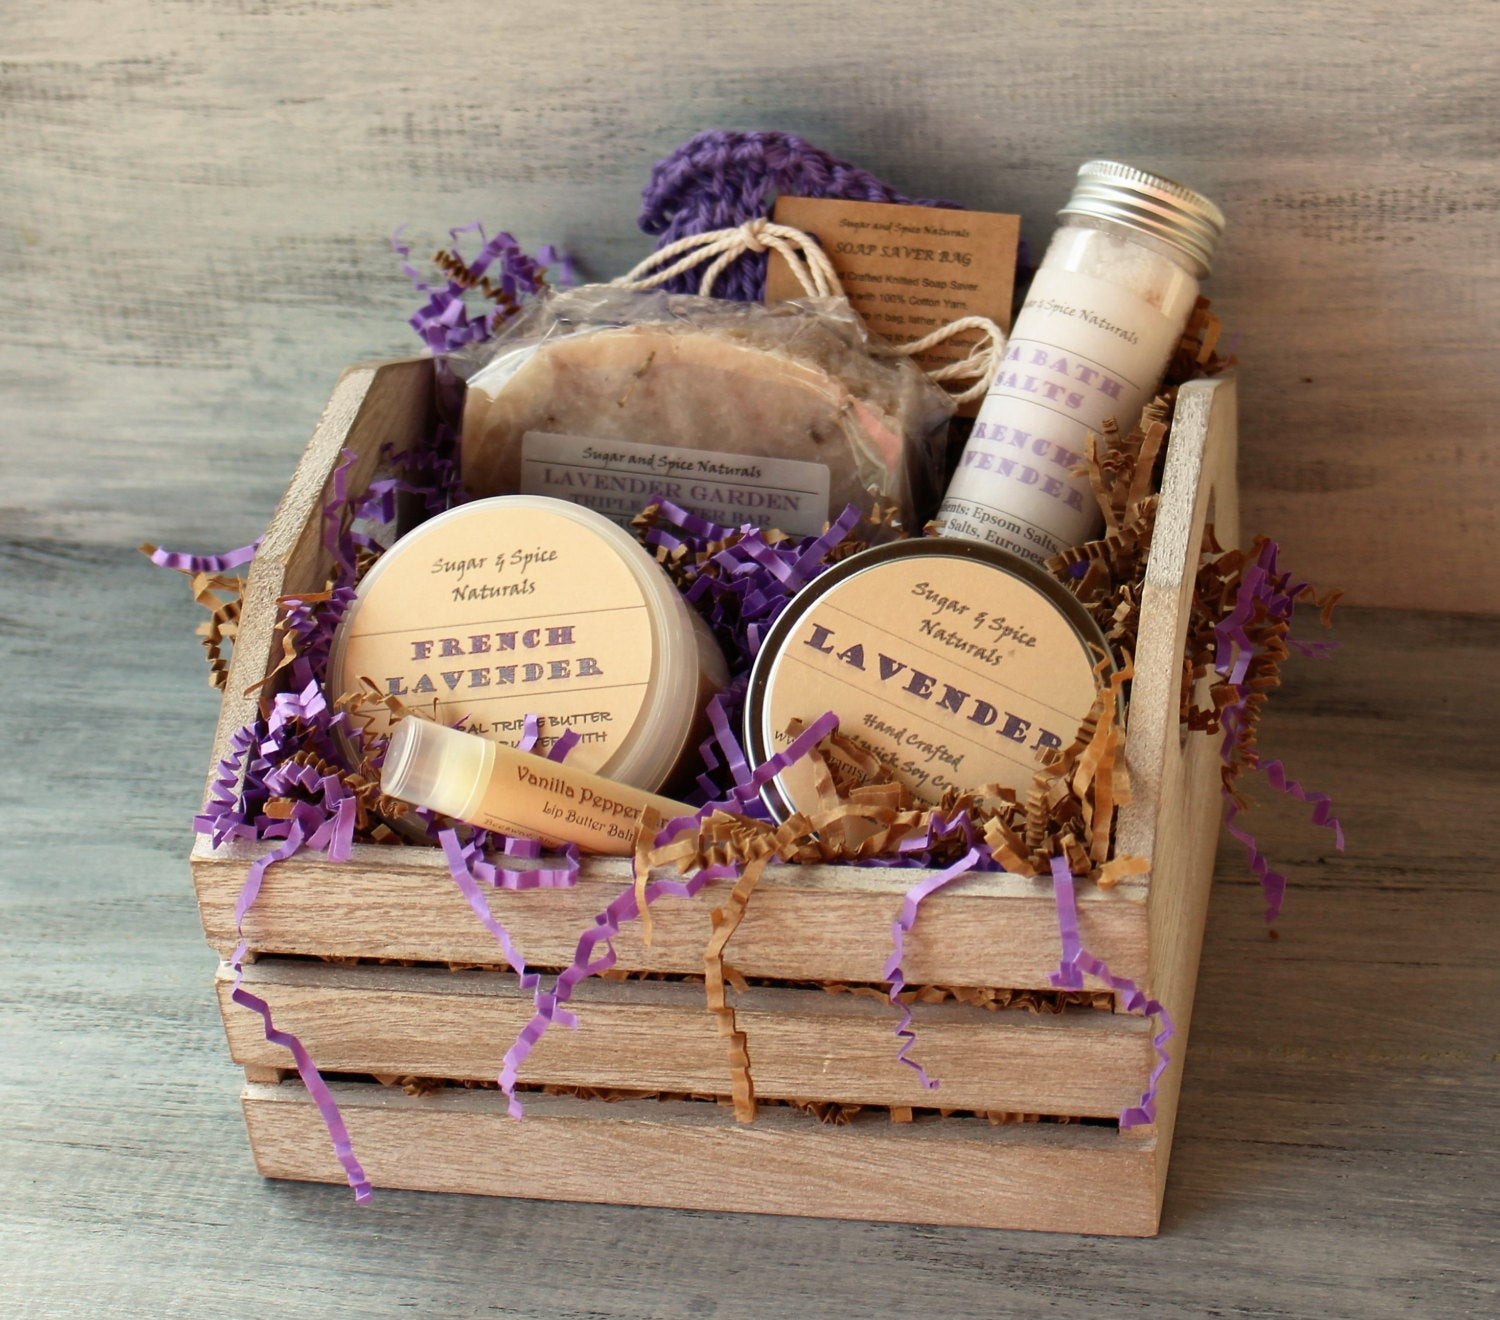 Bath And Body Gift Basket Ideas
 Lavender Soap Spa Bath & Body Gift Basket with Soap French